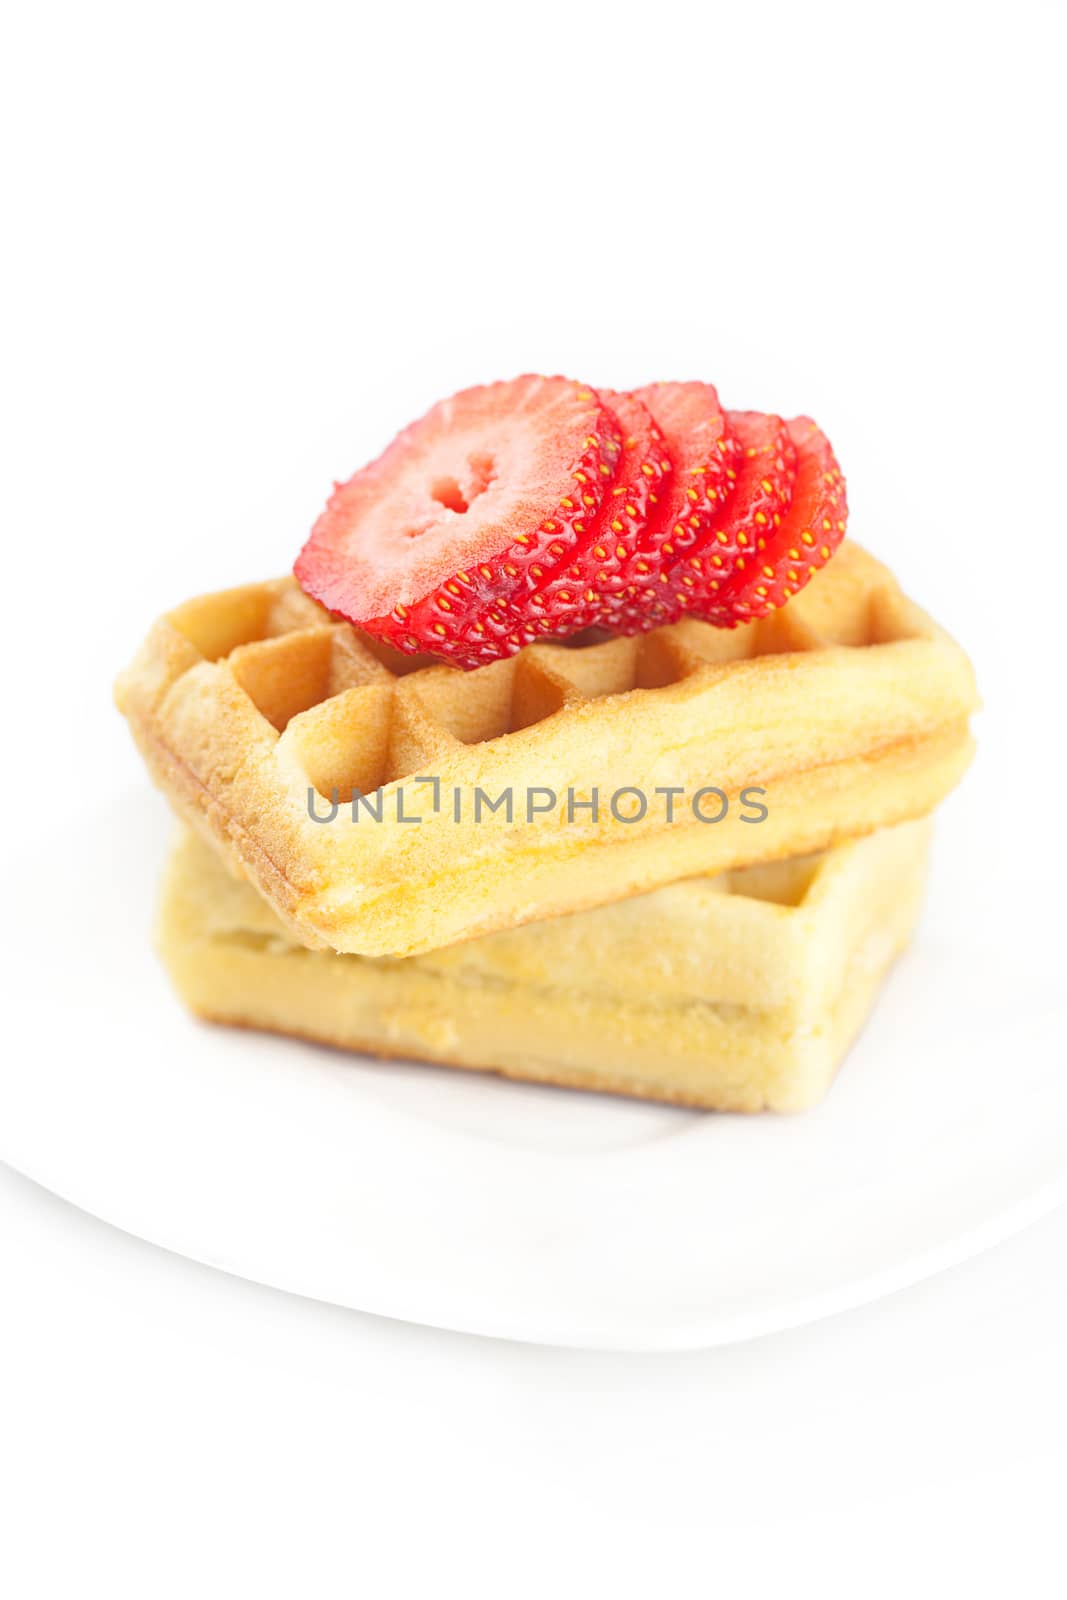 Belgian waffles and strawberry on a plate isolated on white